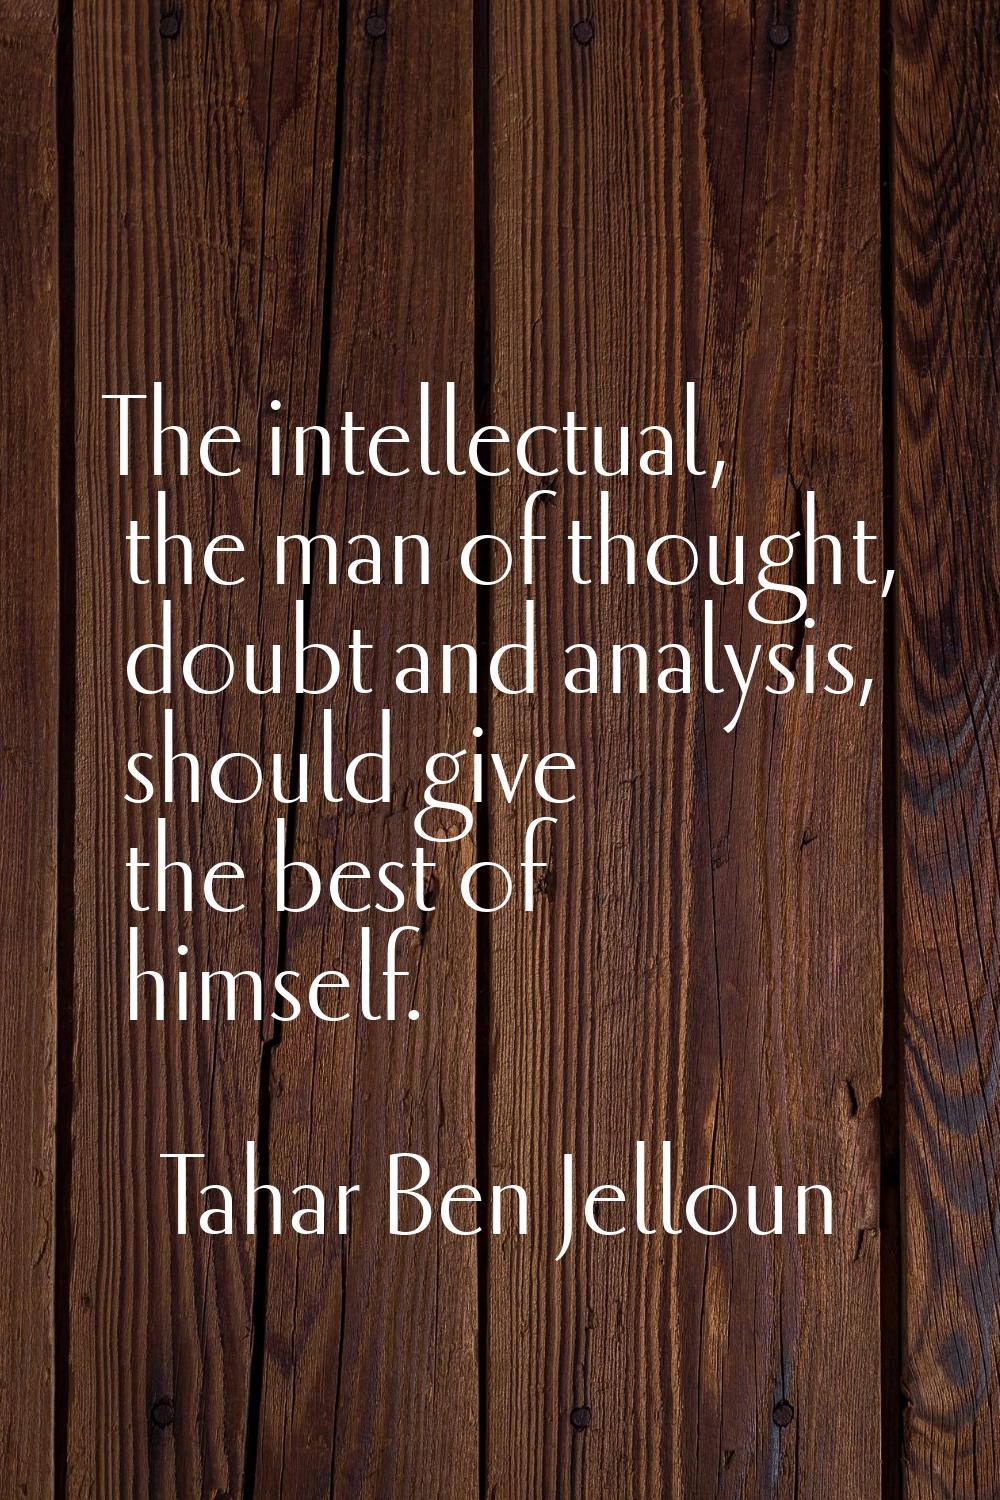 The intellectual, the man of thought, doubt and analysis, should give the best of himself.